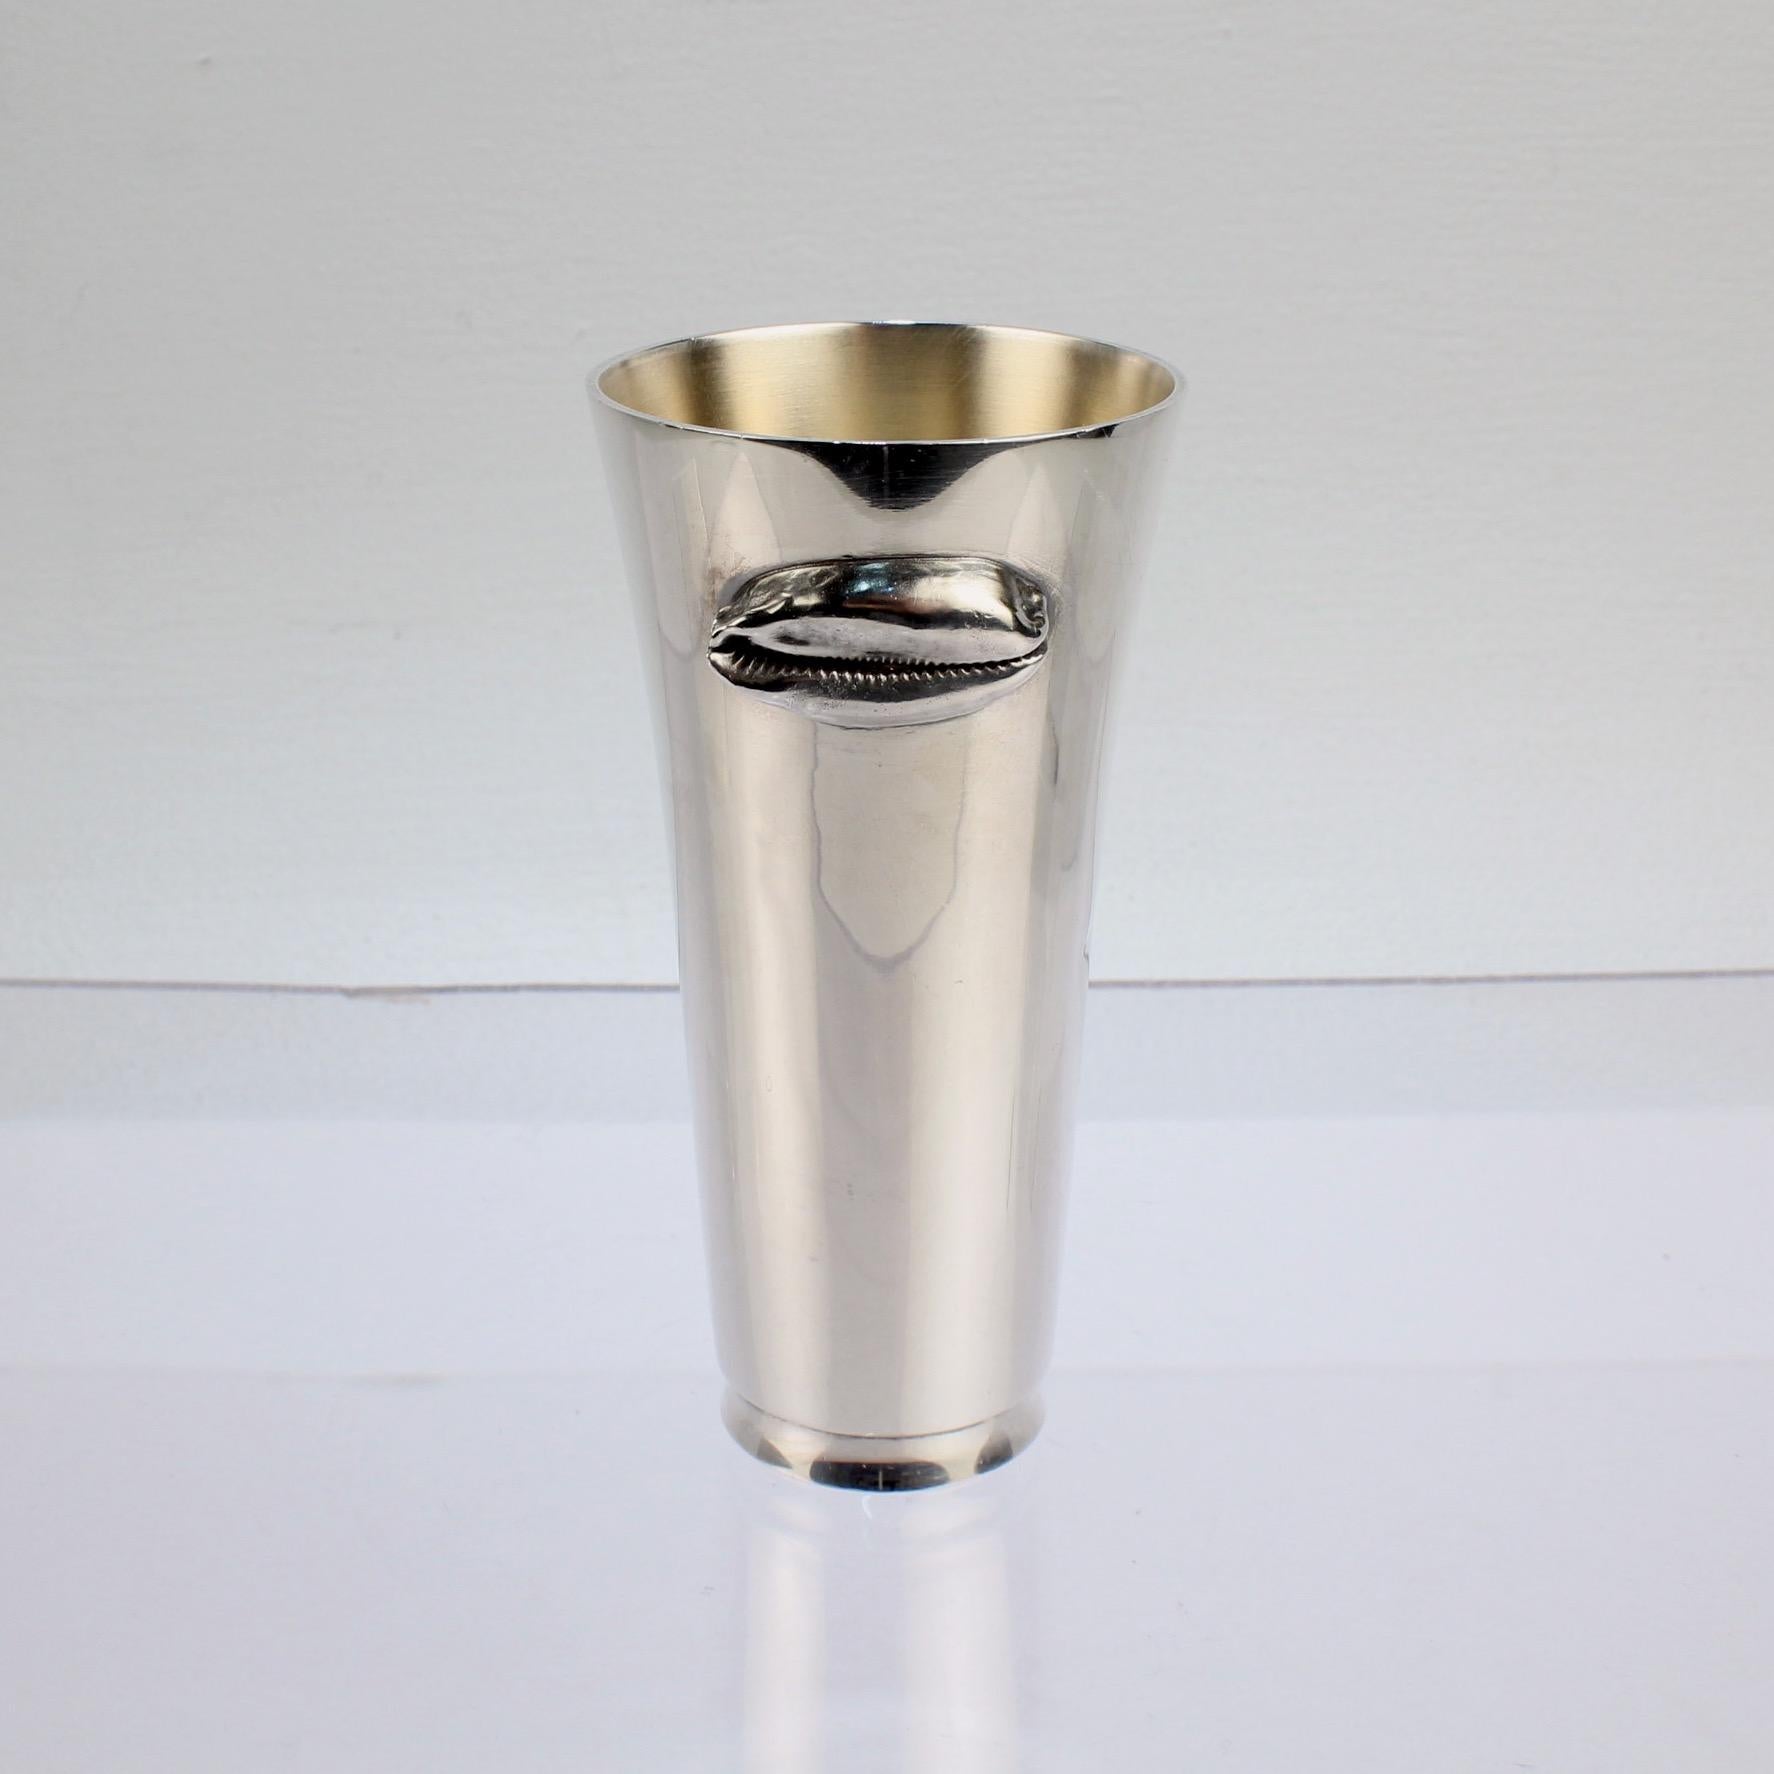 A wonderful tumbler or cup by Jocelyn Burton.

In sterling silver with an applied figural cowrie shell, tapered sides and gilt interior.

Jocelyn Burton was an enormously important English female silvermith and goldsmith. She executed numerous